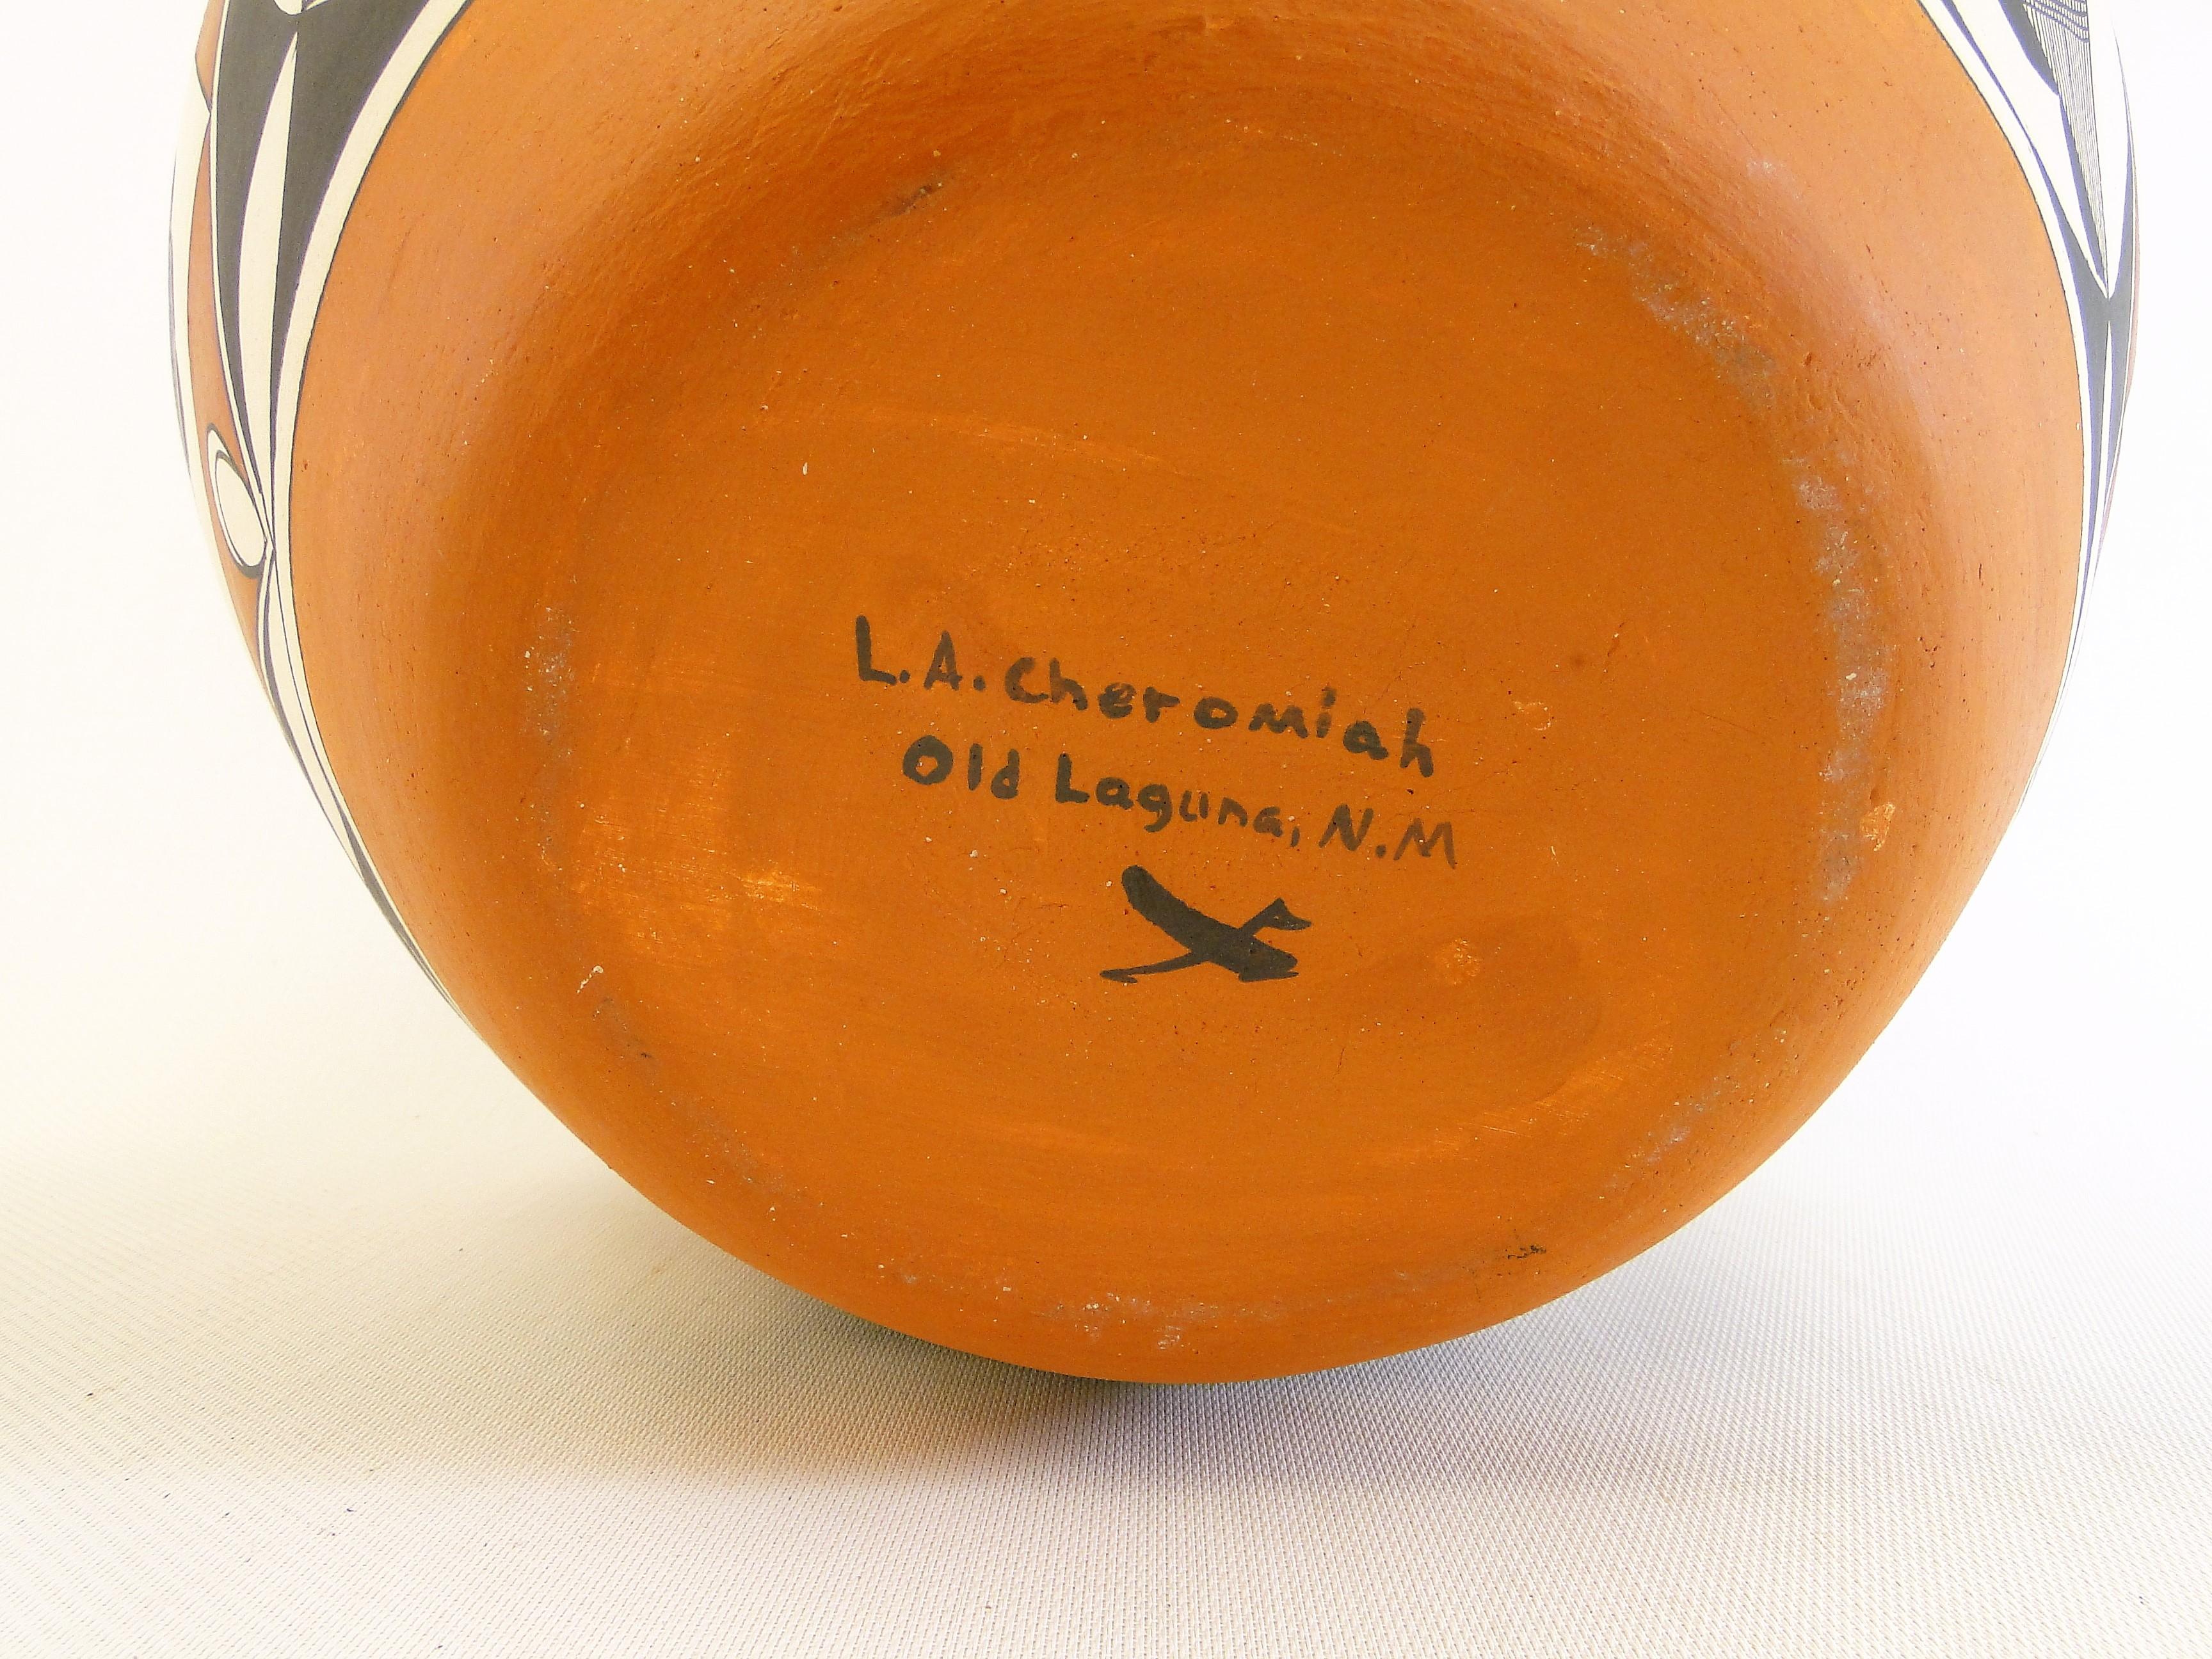 Laguna Peublo Pottery  by Lee Ann Cheromiah In Excellent Condition For Sale In Tulsa, OK